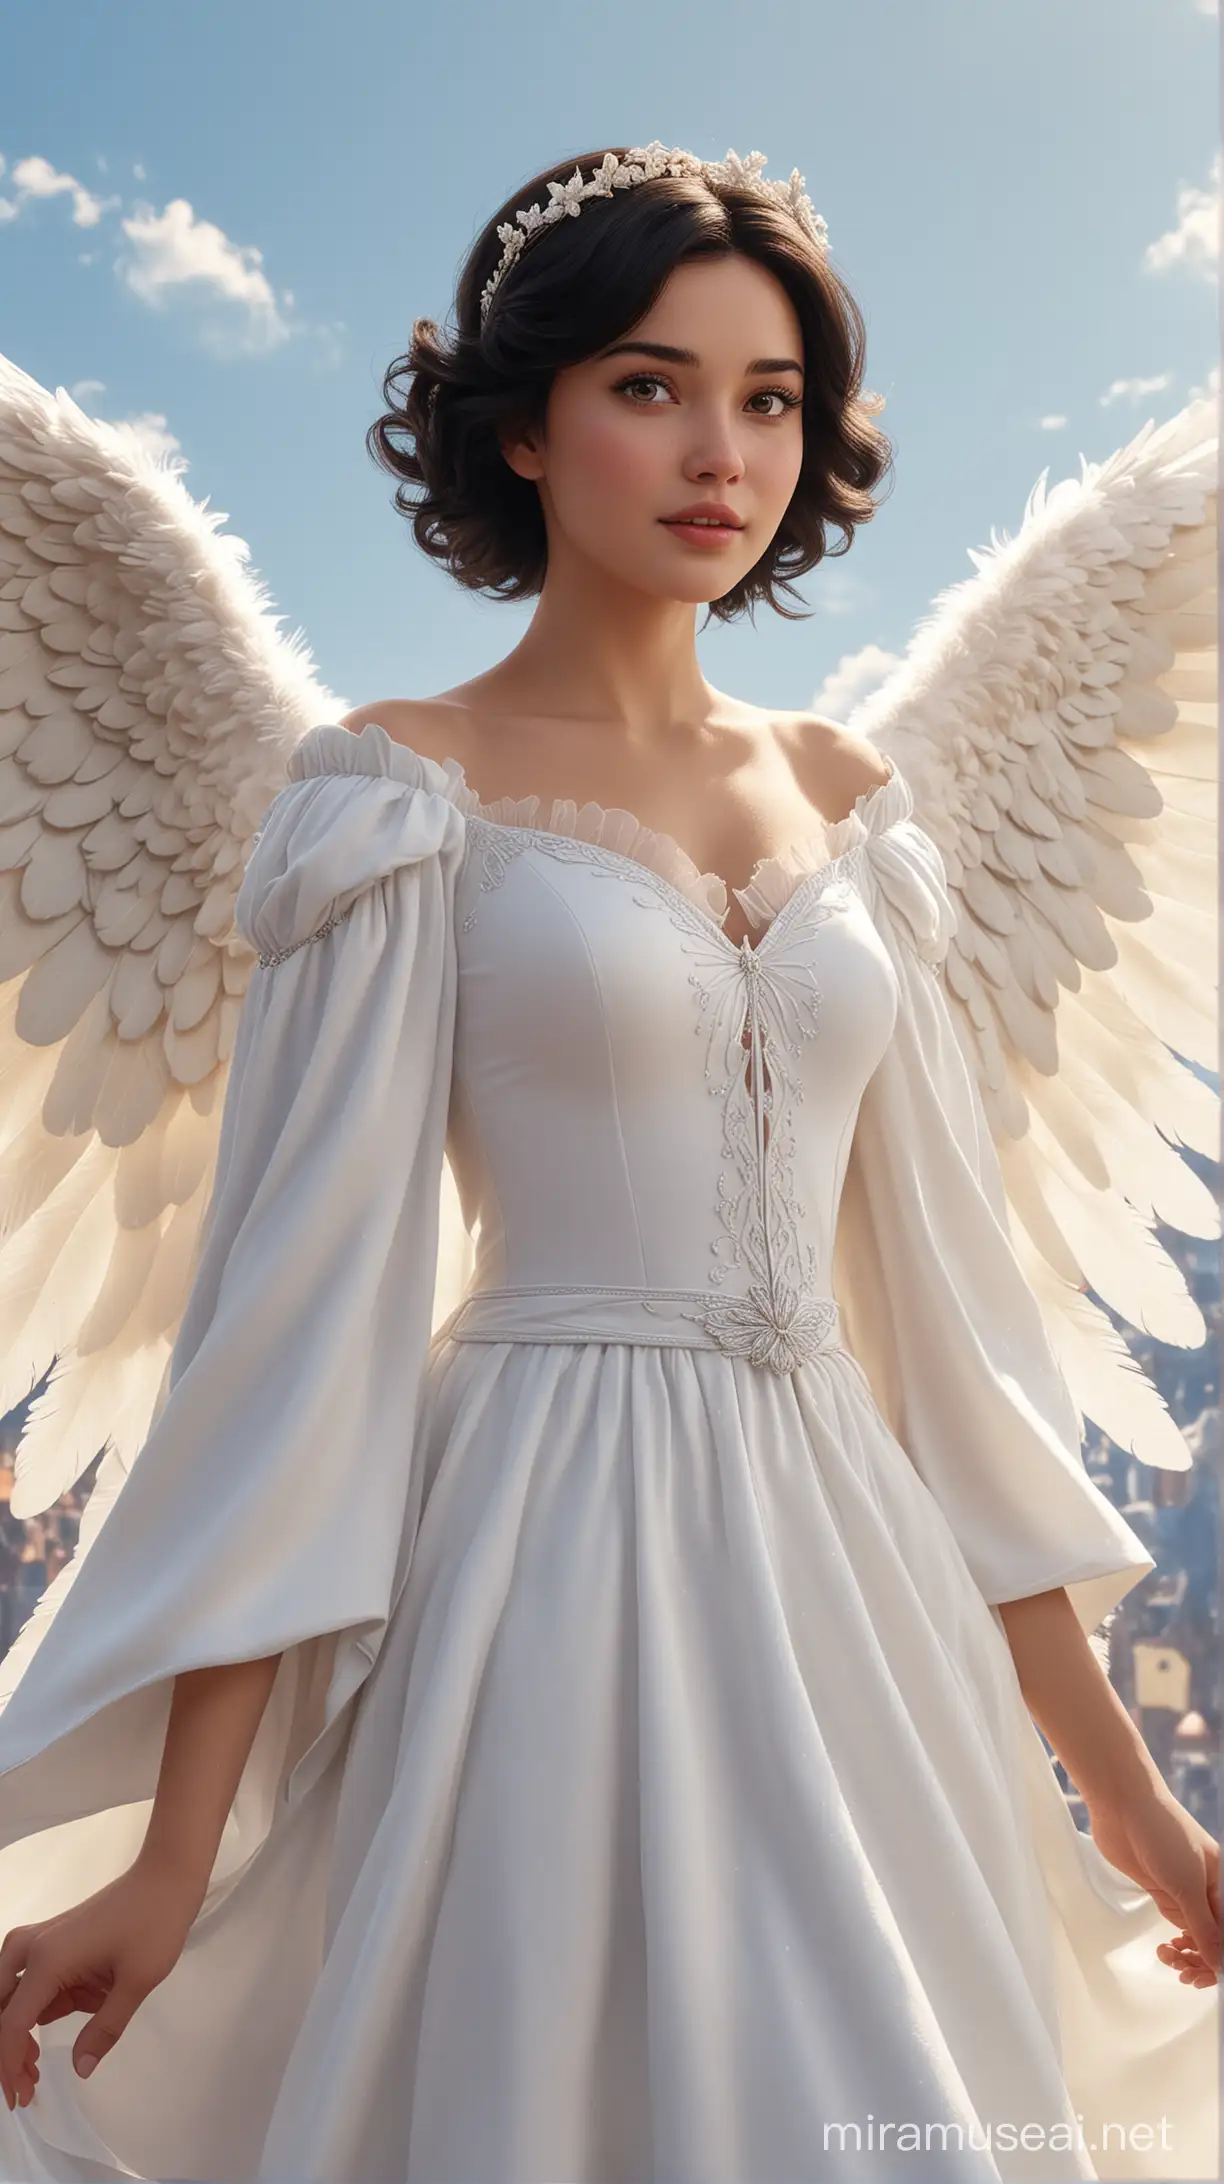 Celestial Snow White with Angel Wings in UltraRealistic 8K Resolution